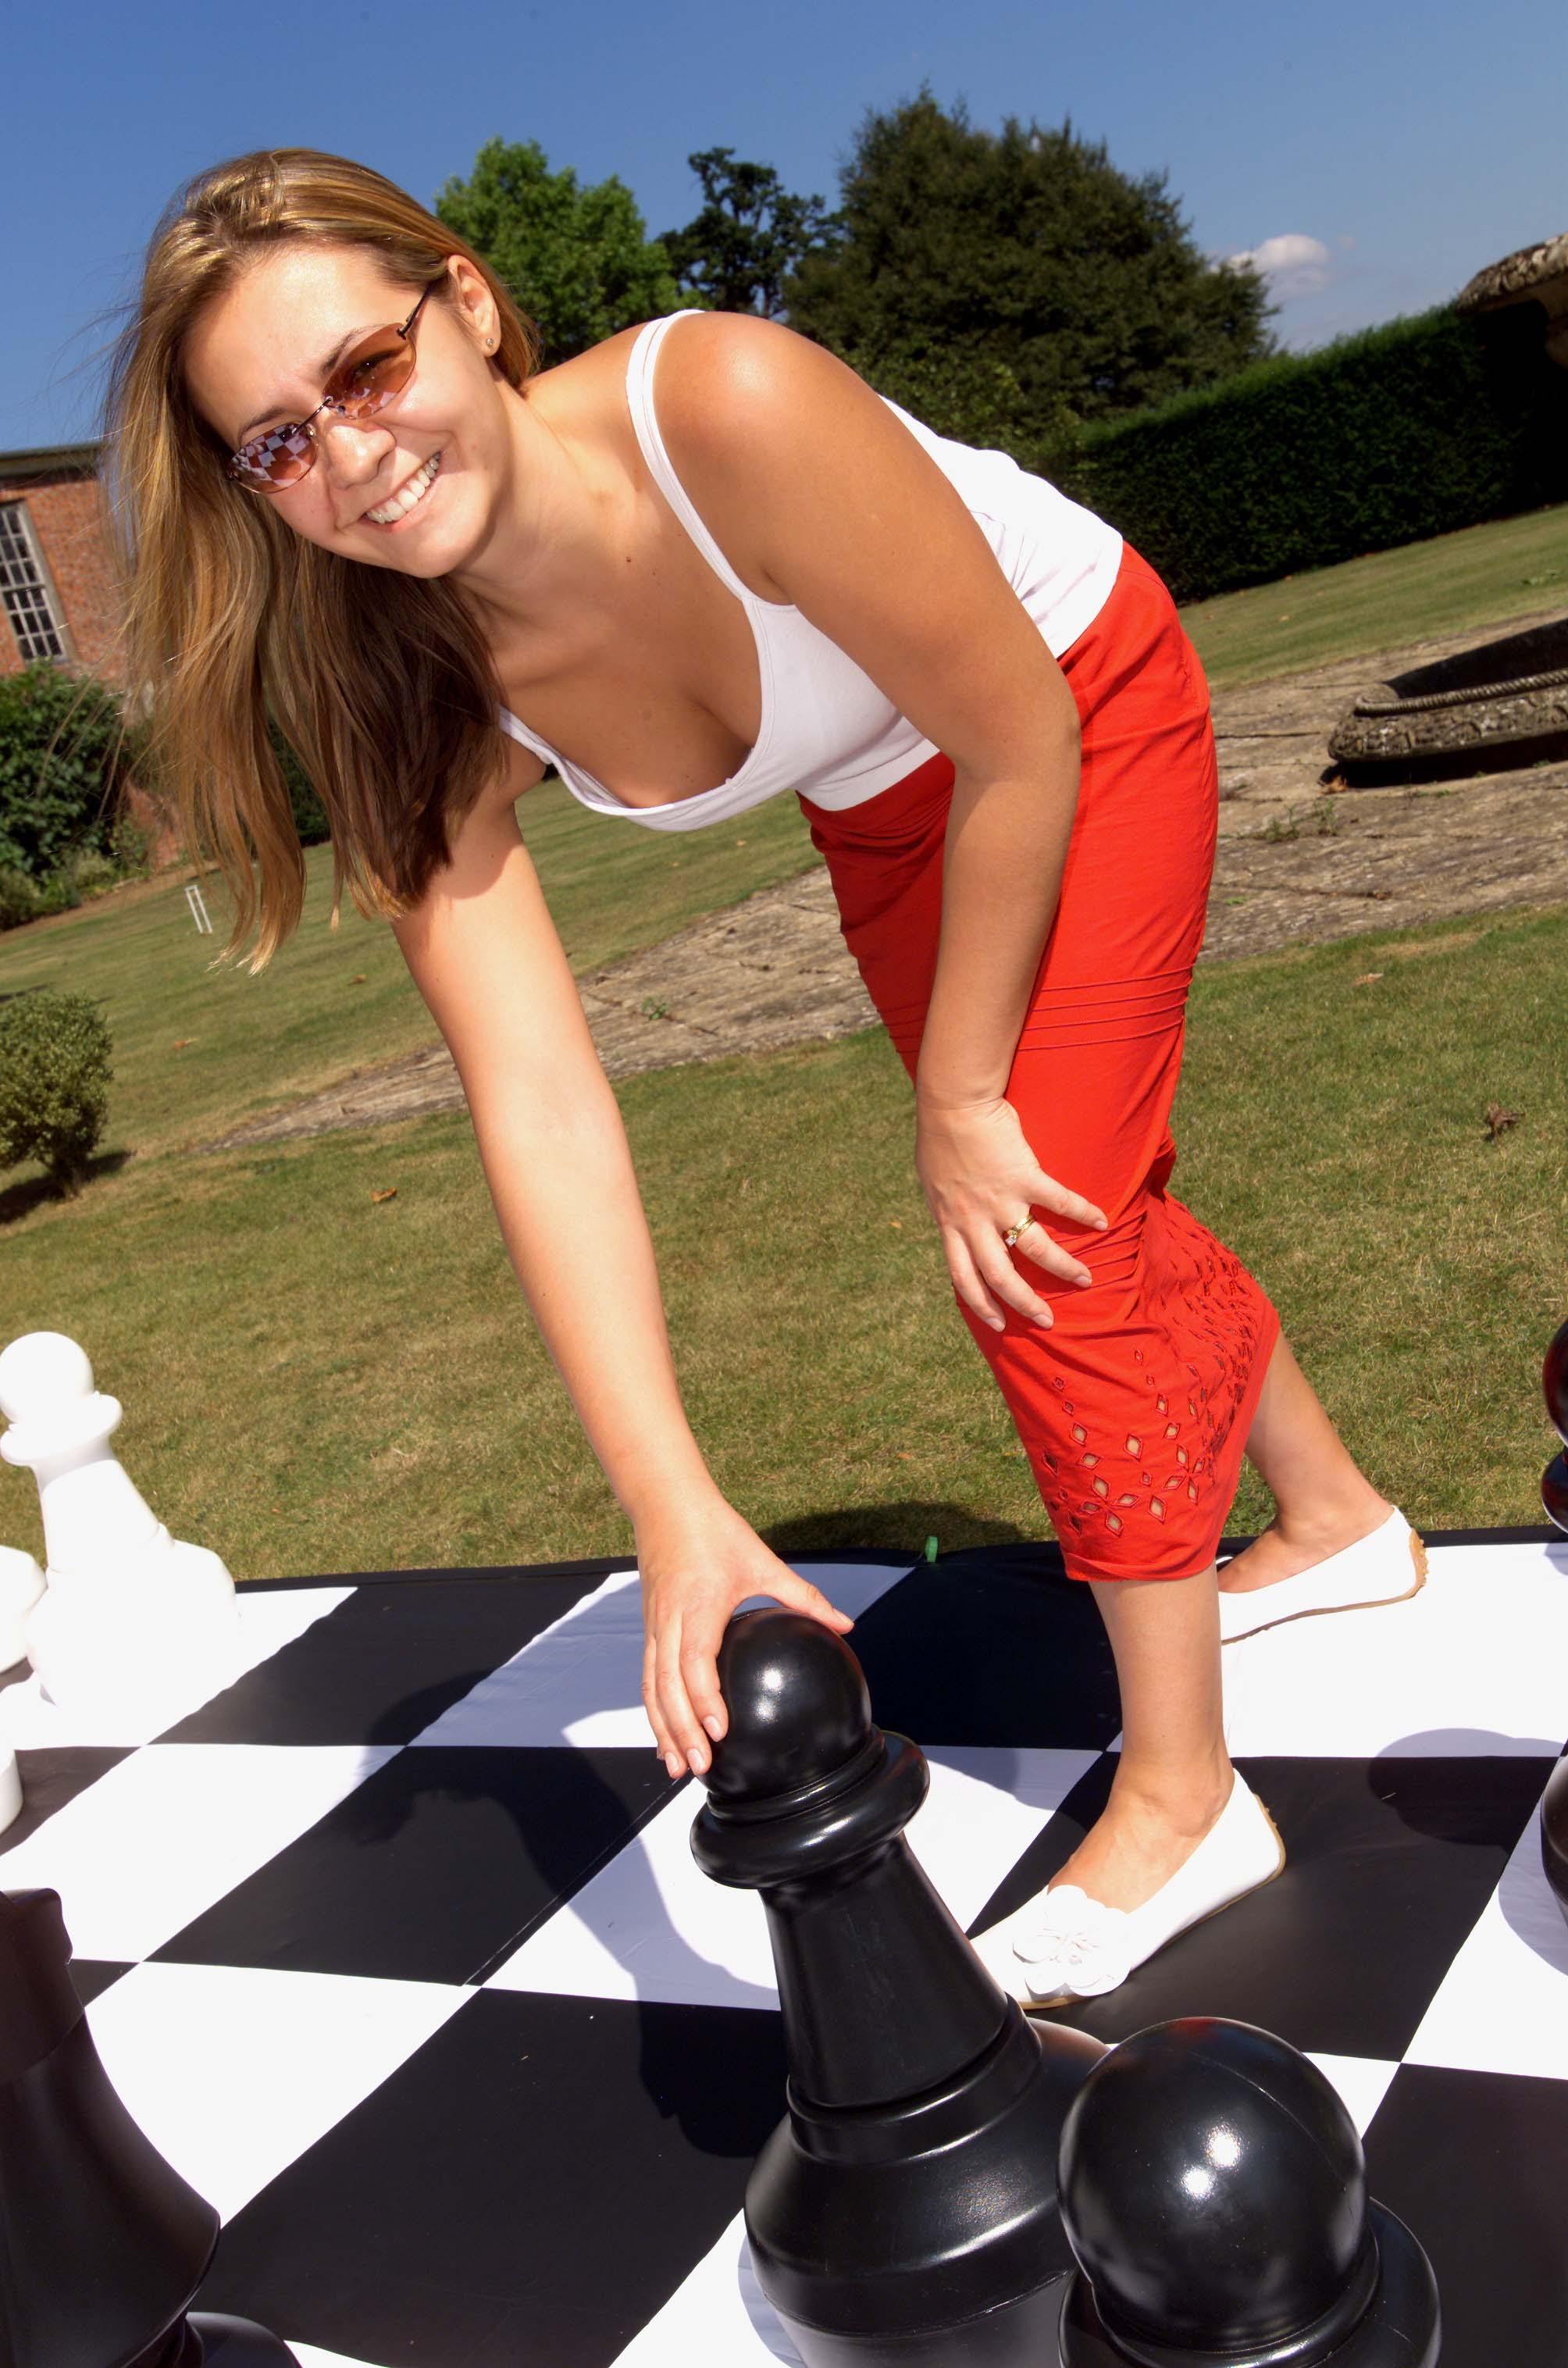 Giant Chess with Mat - DTI Direct Canada